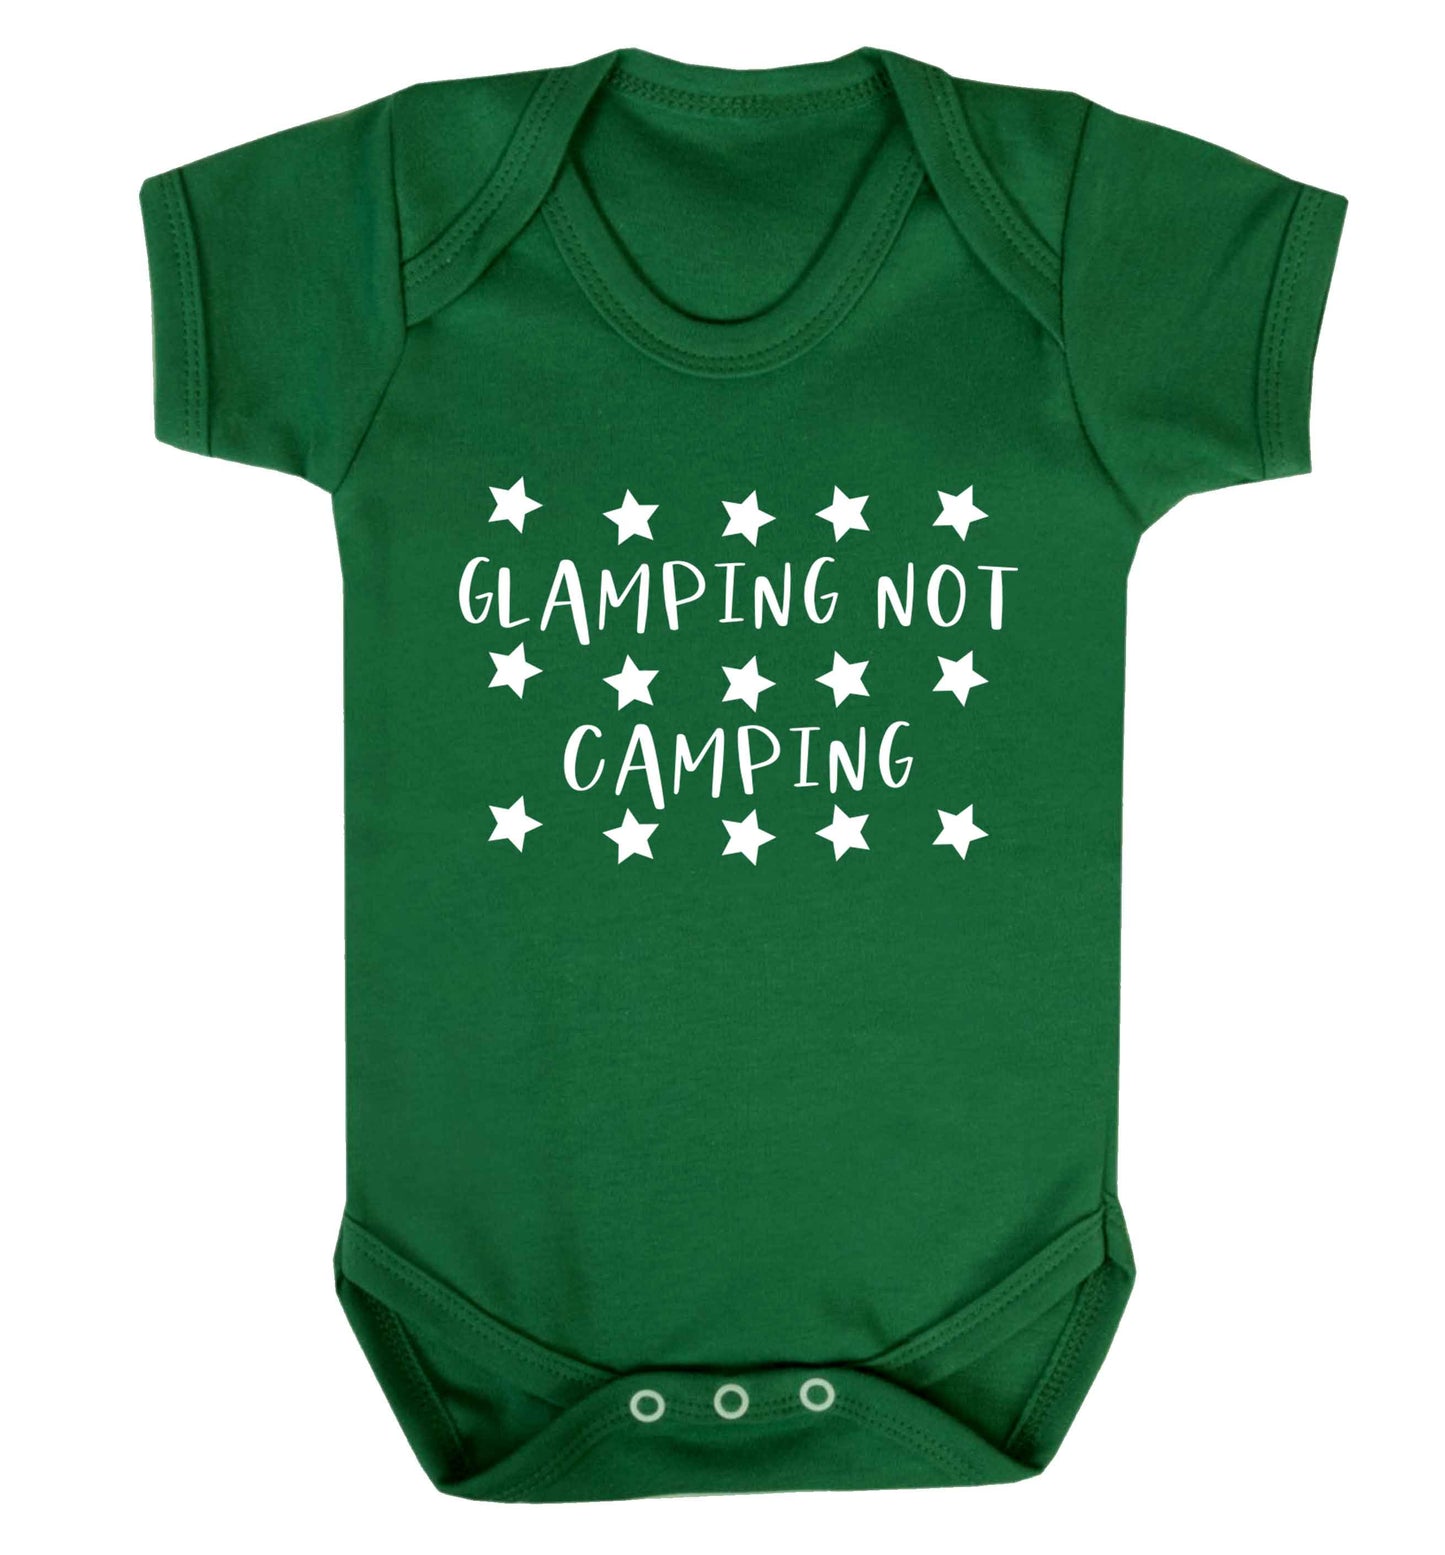 Glamping not camping Baby Vest green 18-24 months